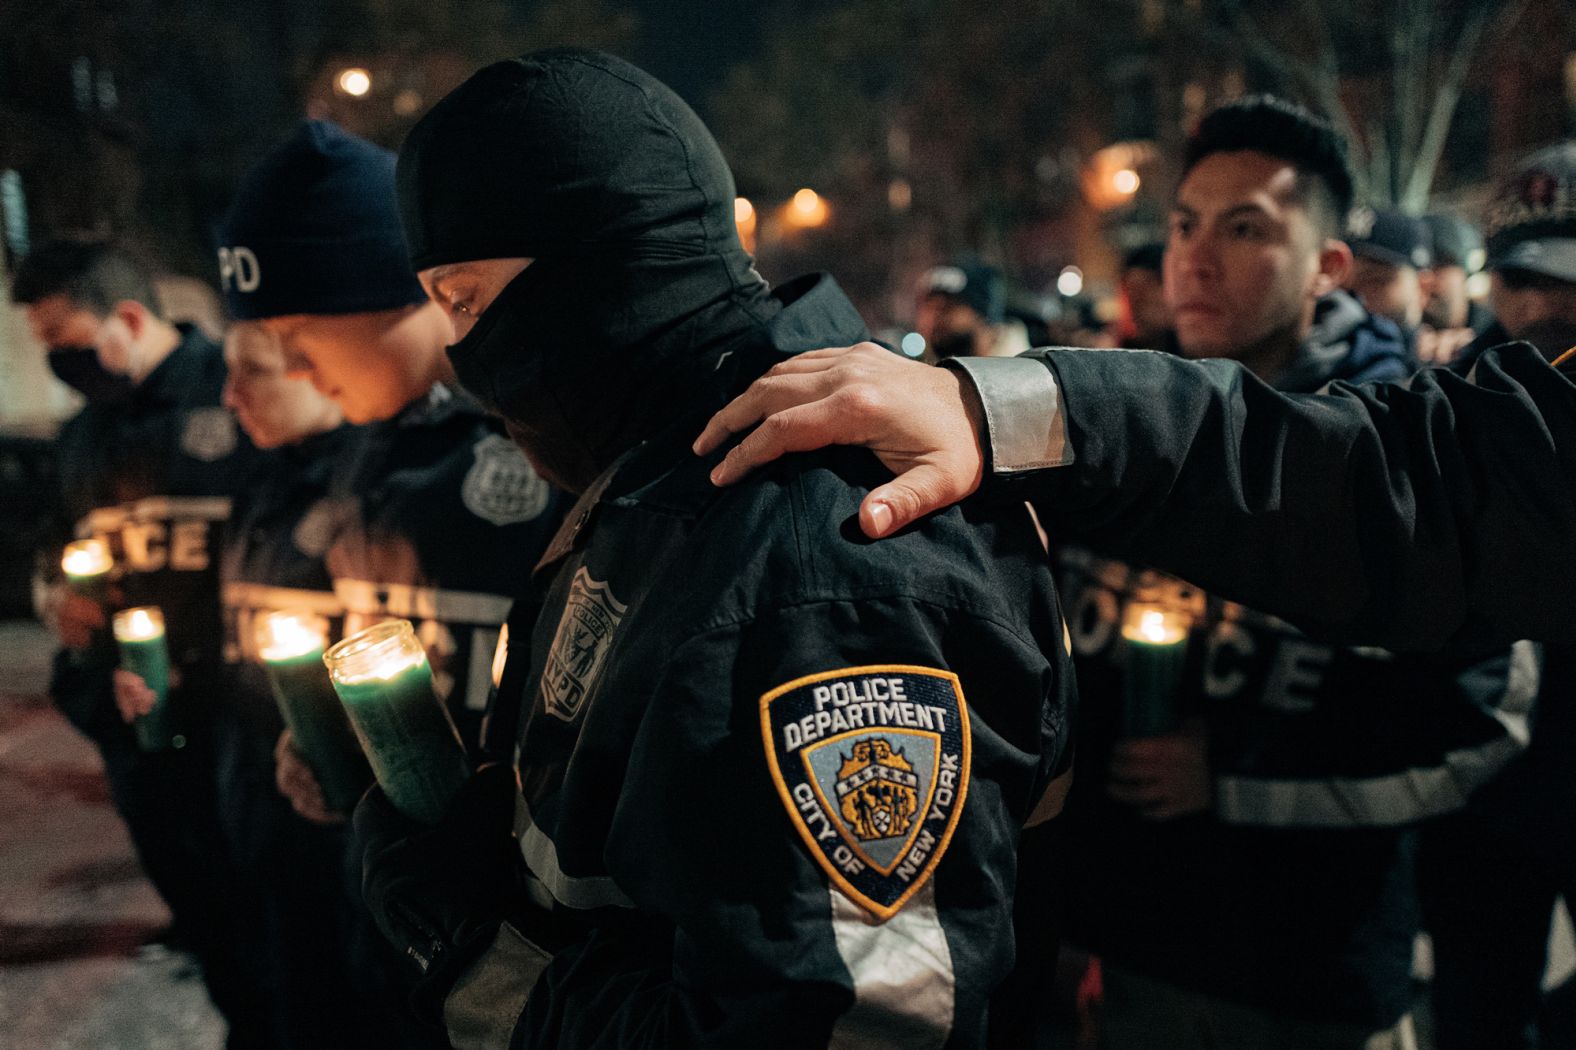 Police officers gather at a vigil on January 22.